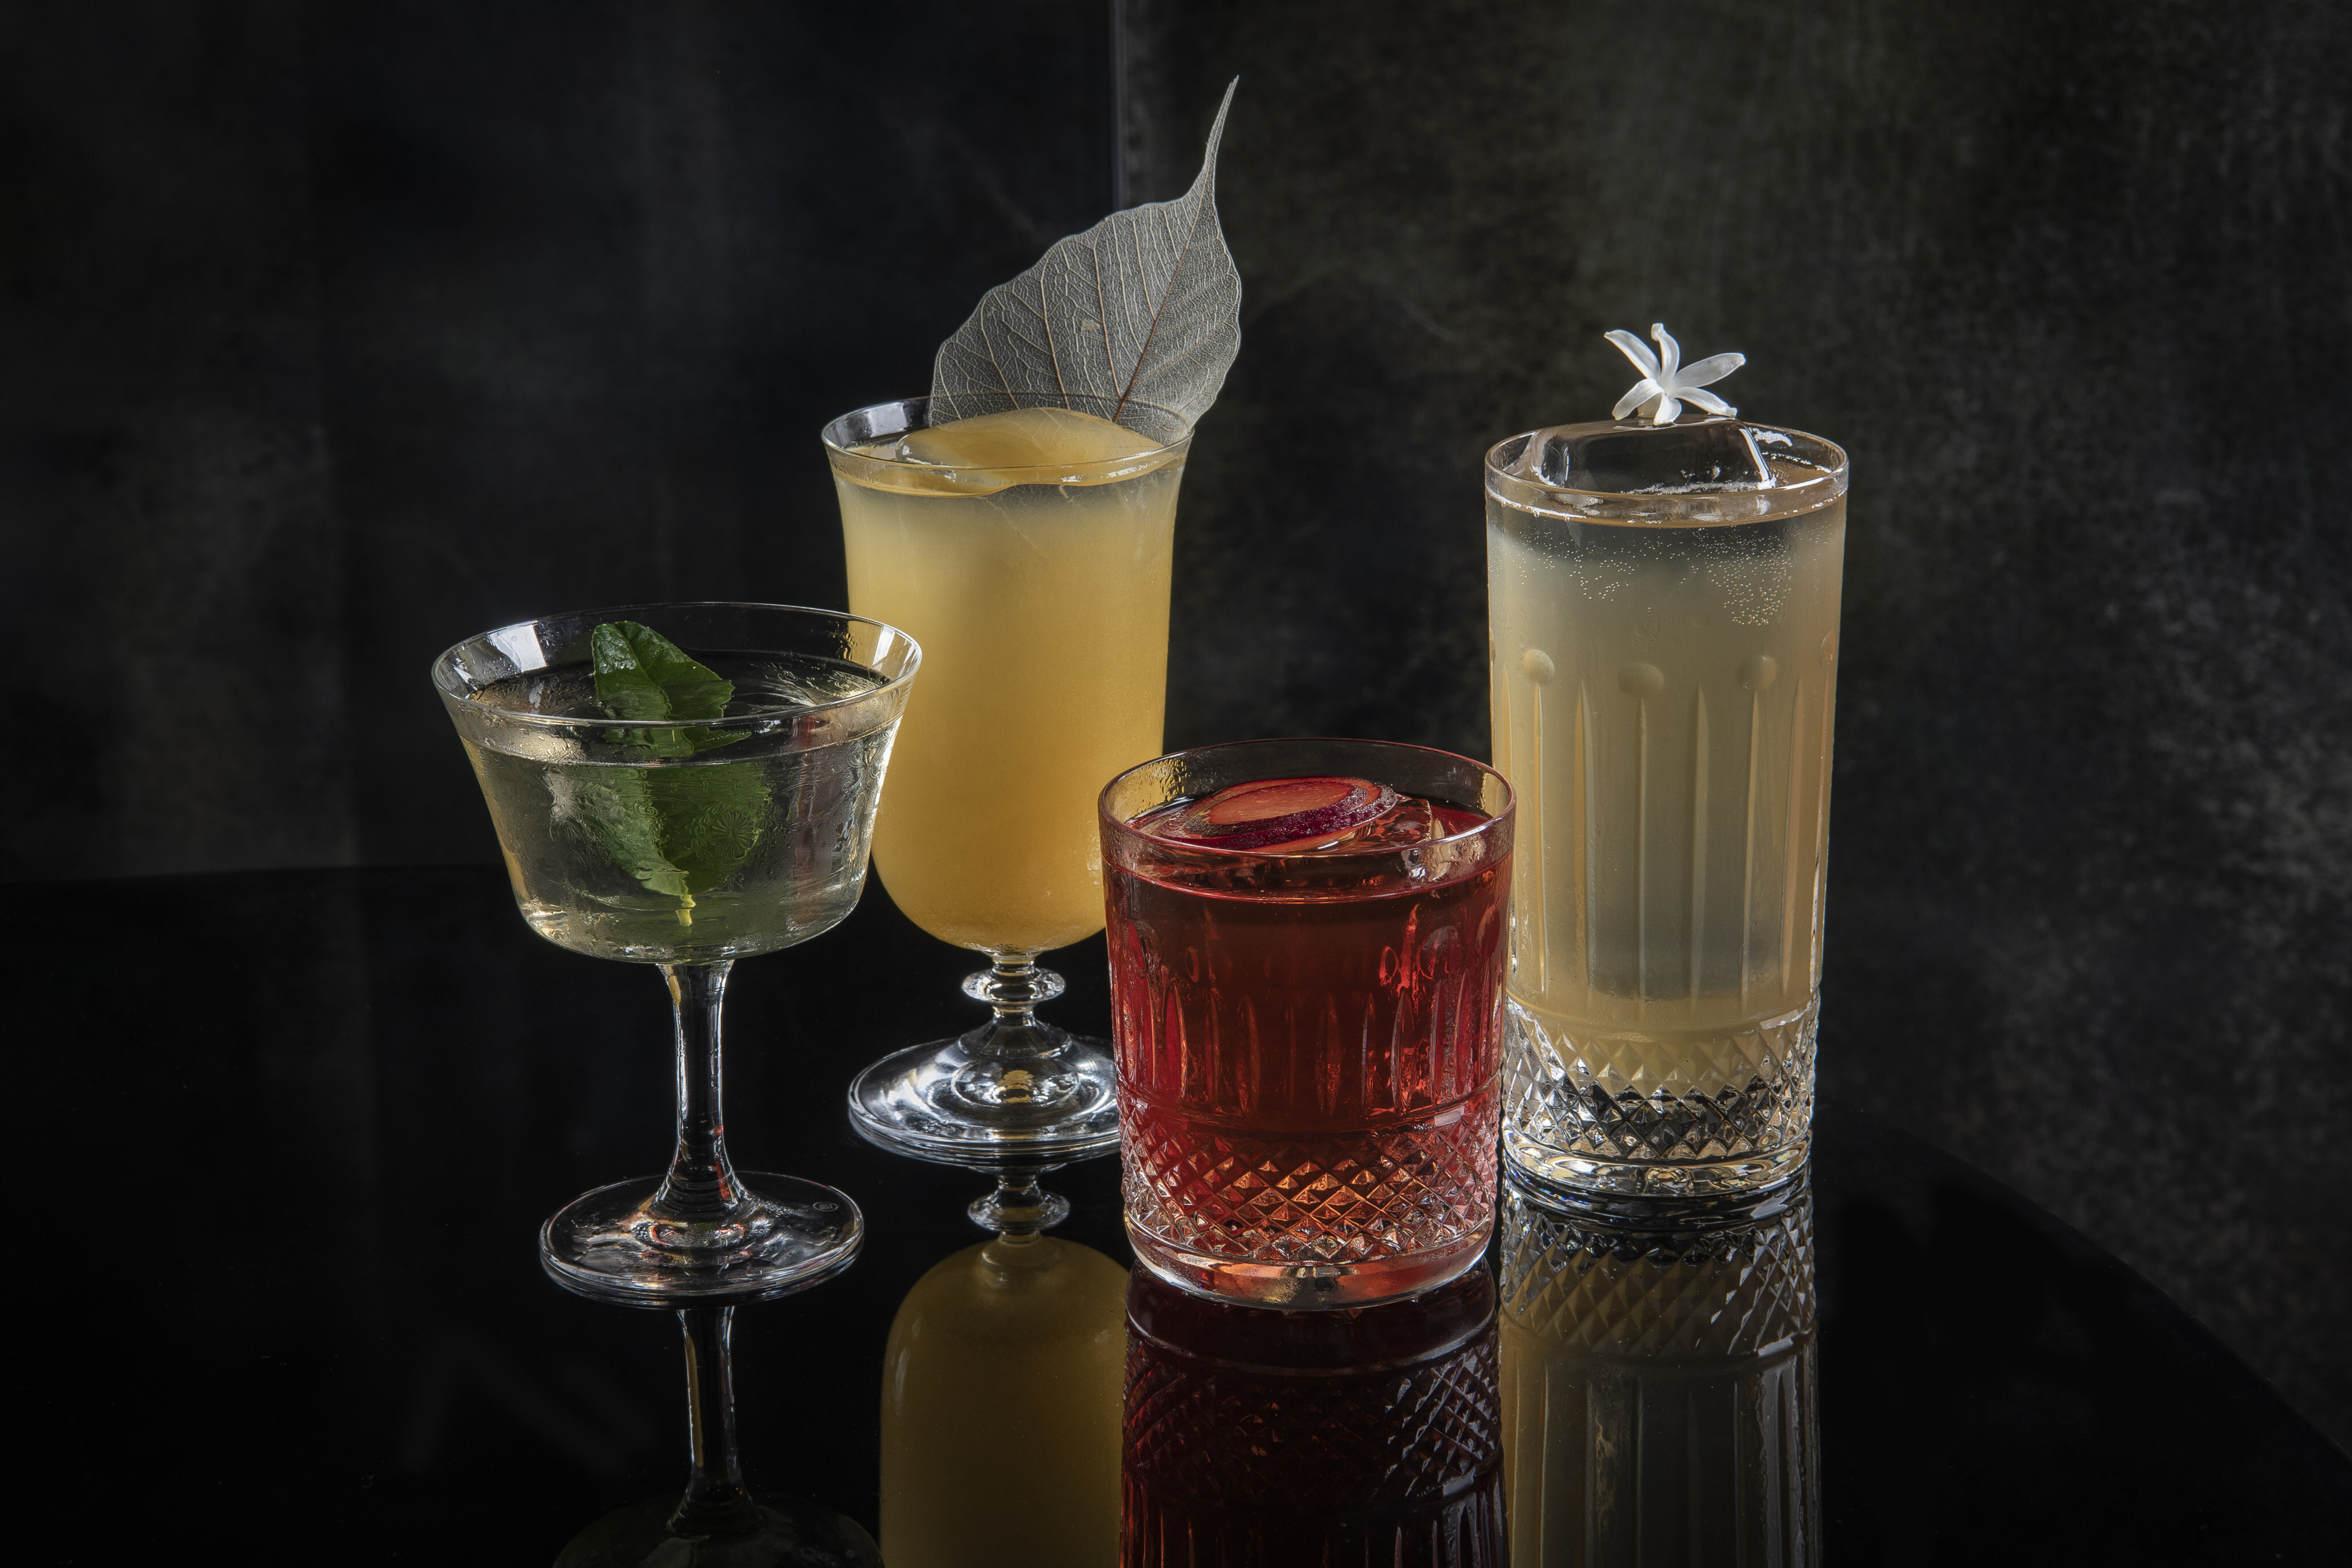 A range of cocktails from Darkside. Photo: Rosewood Hong Kong